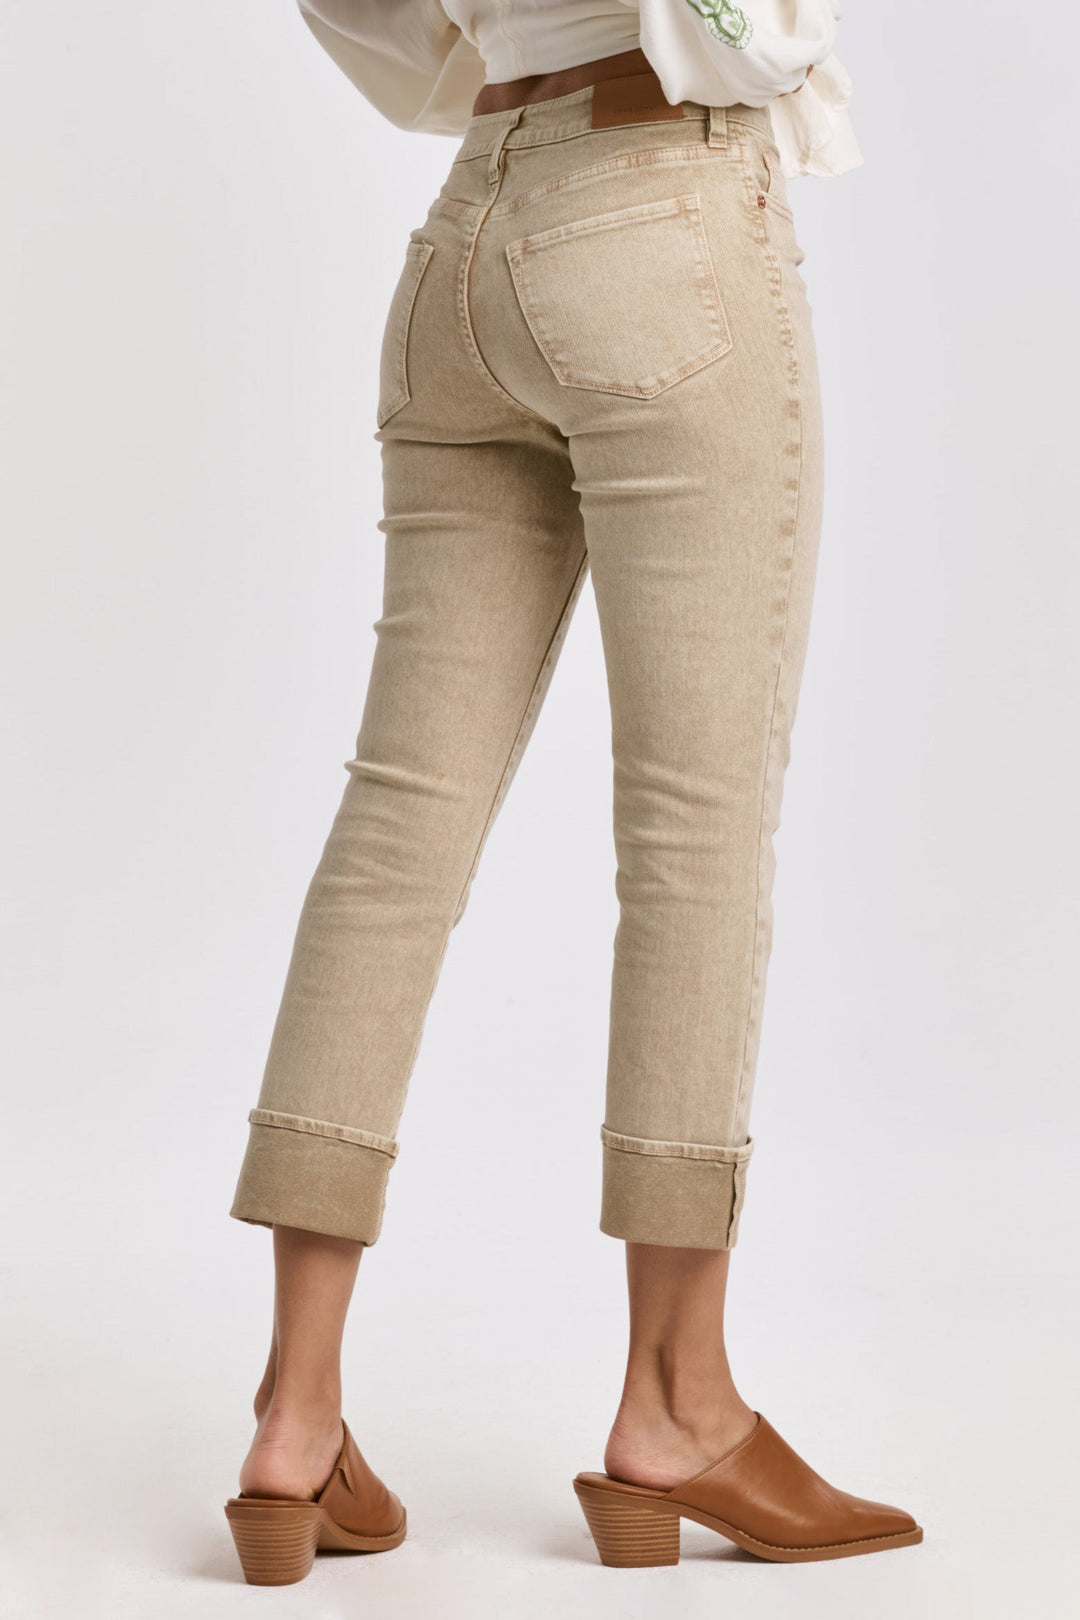 blaire-high-rise-cuffed-slim-straight-jeans-golden-road